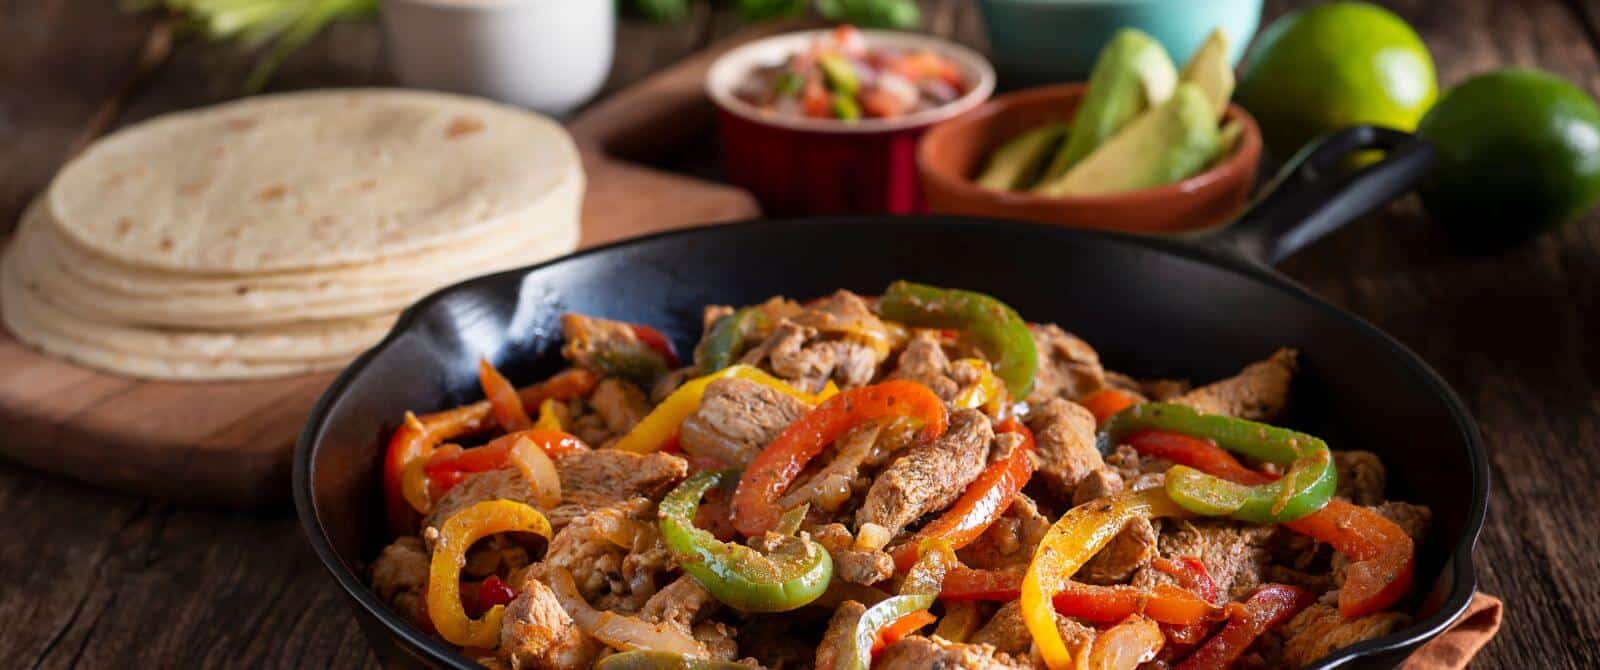 a sizzling plate of steak fajitas with red and green peppers, onions, and a plate of tortillas and bowls of salsa and sliced avocados in the background.